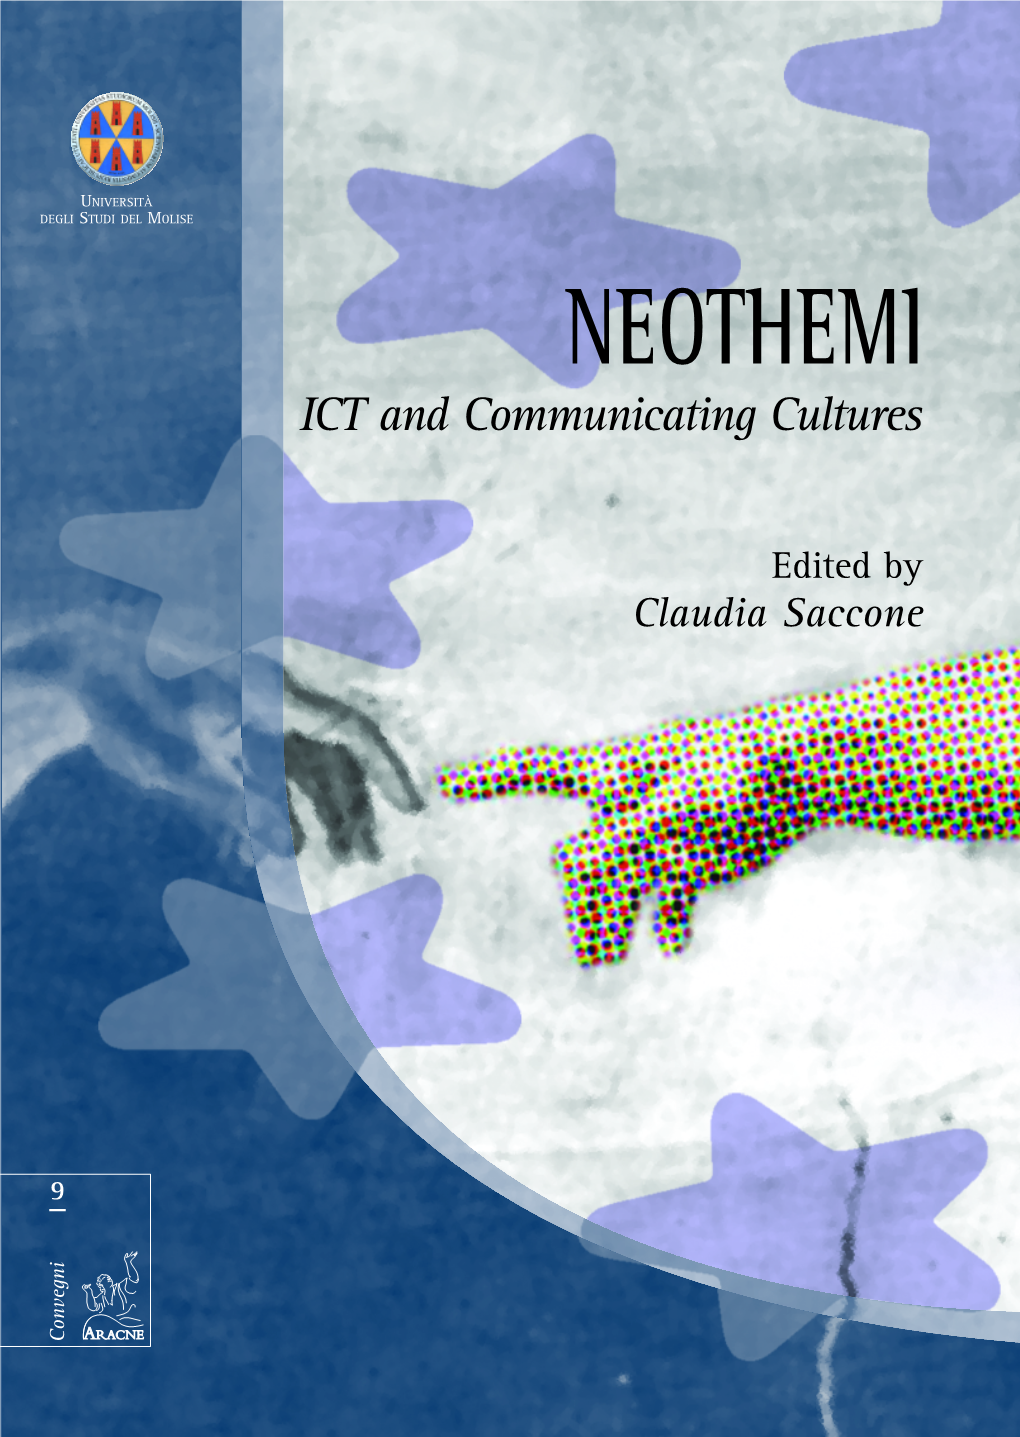 Neothemi (The New Network of Thematic Museums and Institutes) and In-Visi- NEOTHEMI Exchange